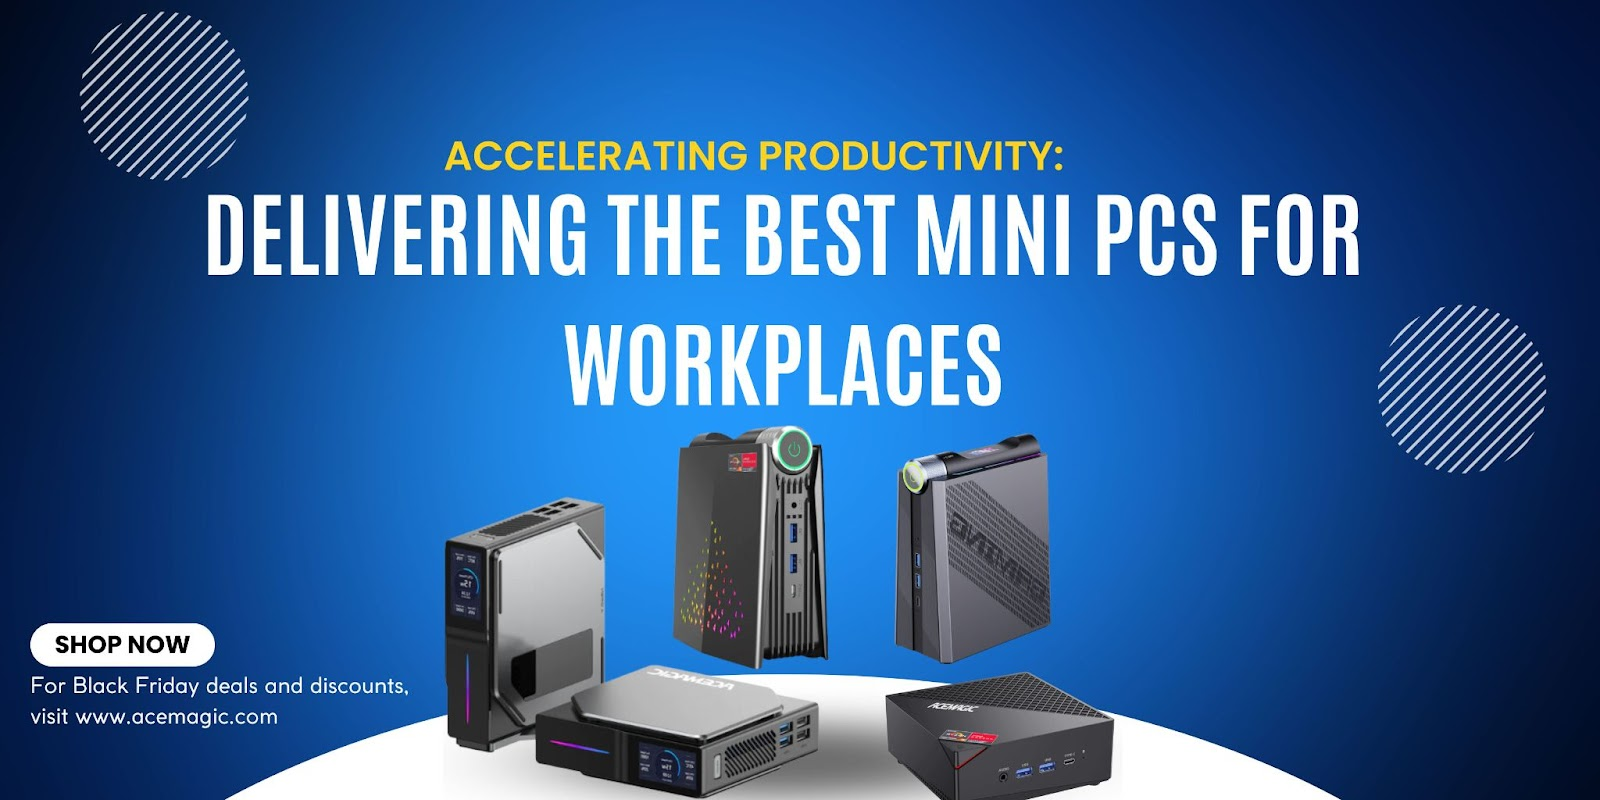 Accelerating Productivity: Delivering the Best Mini PCs for Workplaces